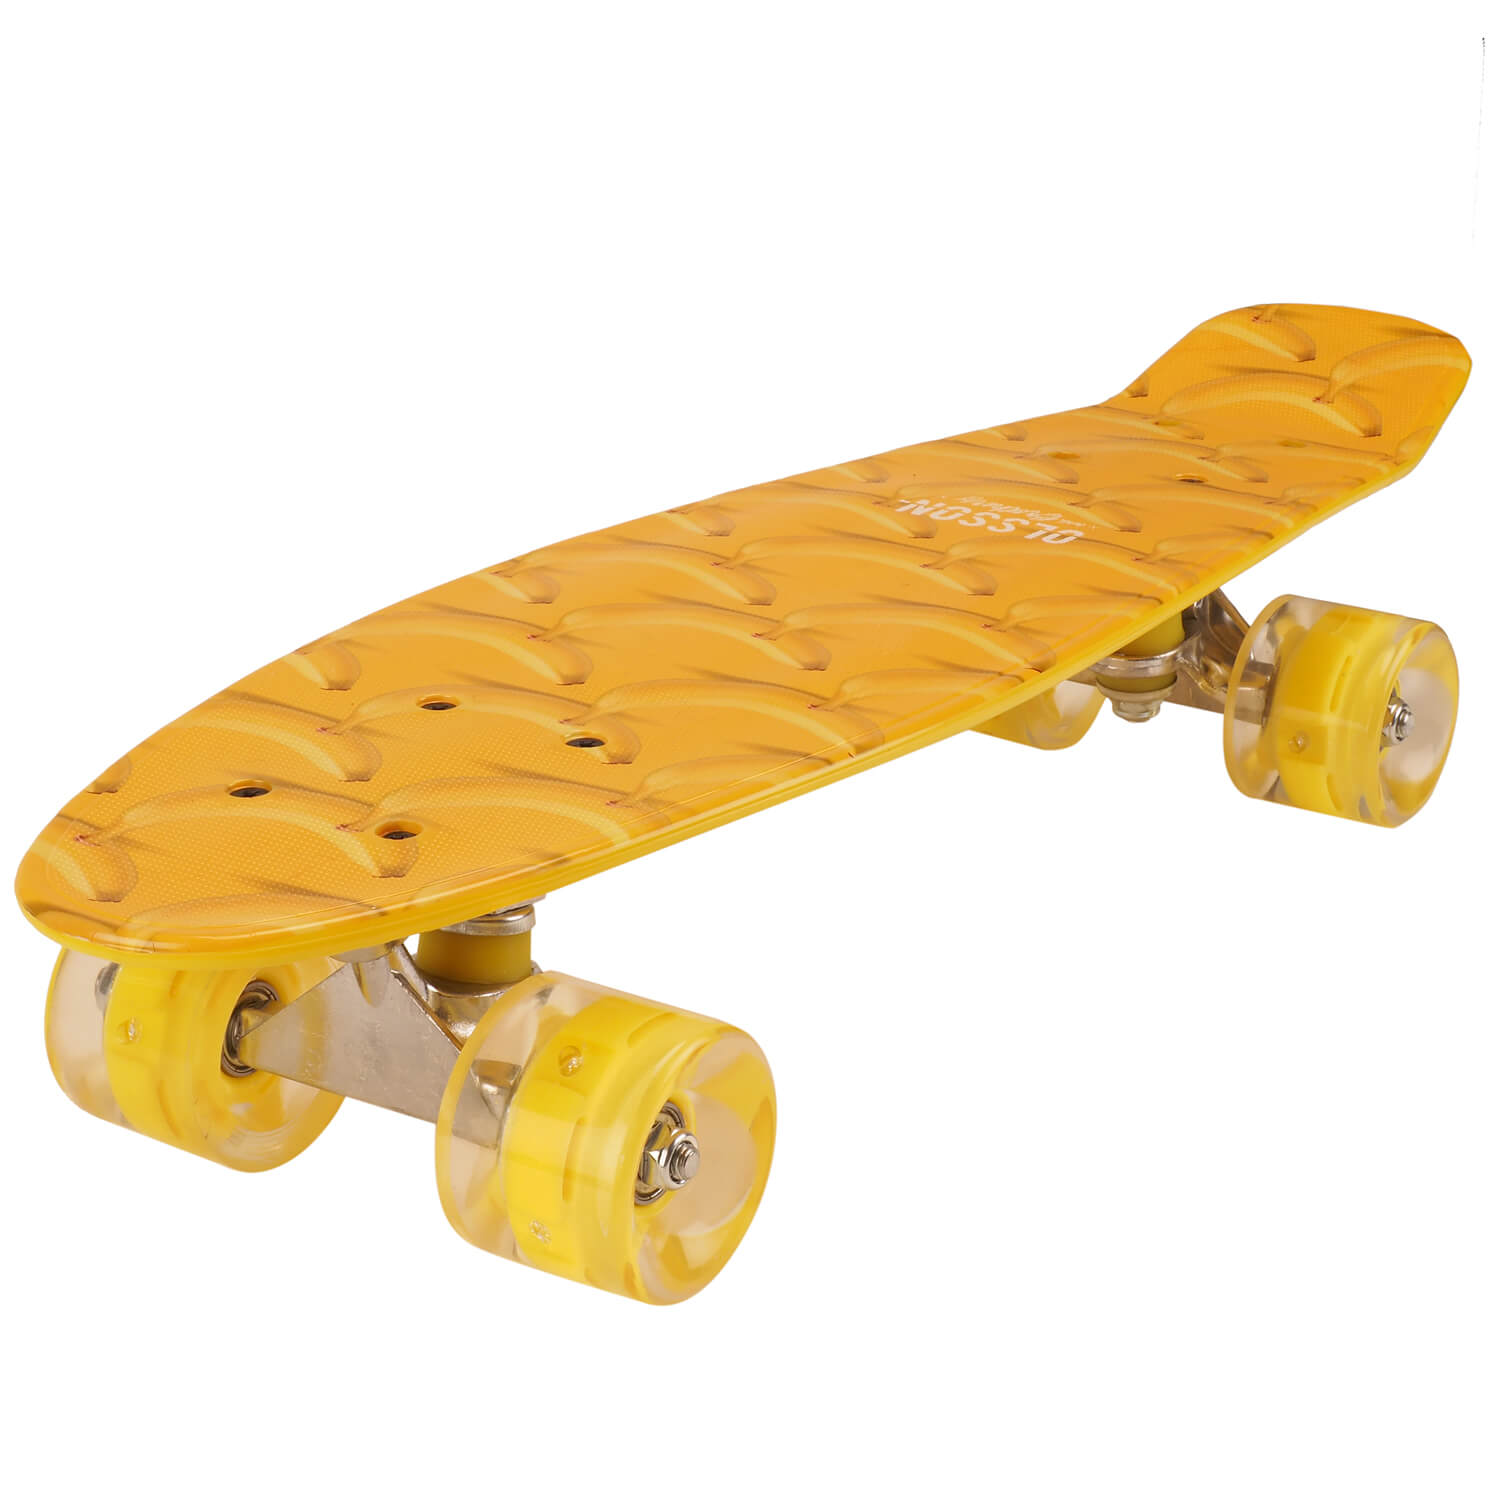 wrench Put away clothes Martyr Penny Board Action One®, cu roti luminoase, 22'', PU, Aluminium, 90 KG  Banana - eMAG.ro